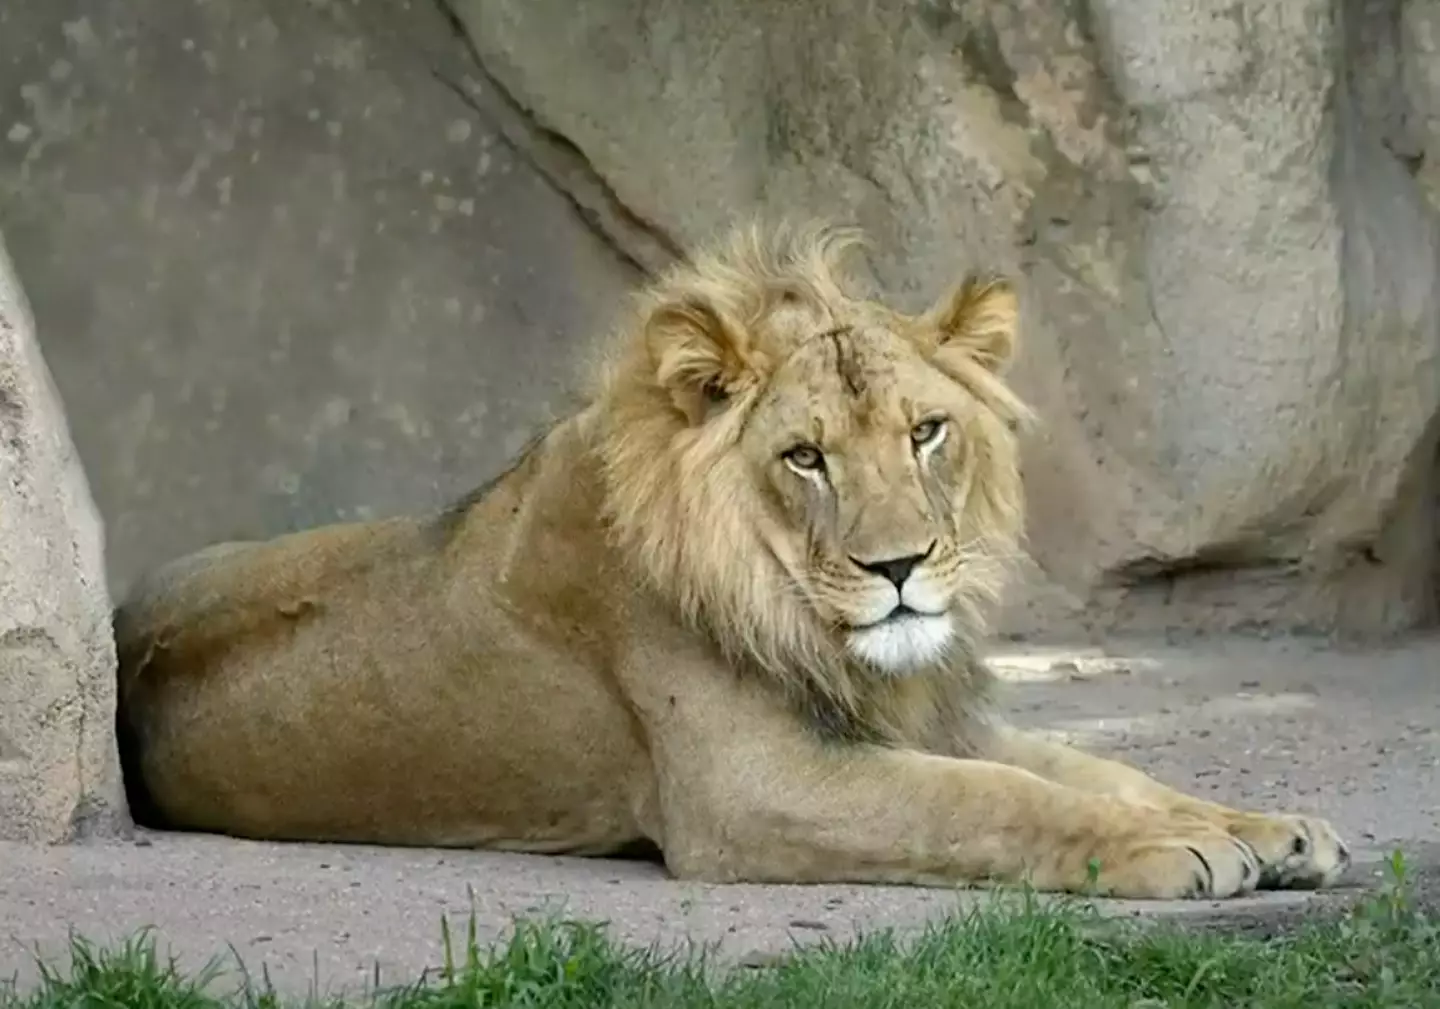 Lioness Zuri started growing a mane aged 18 years old.